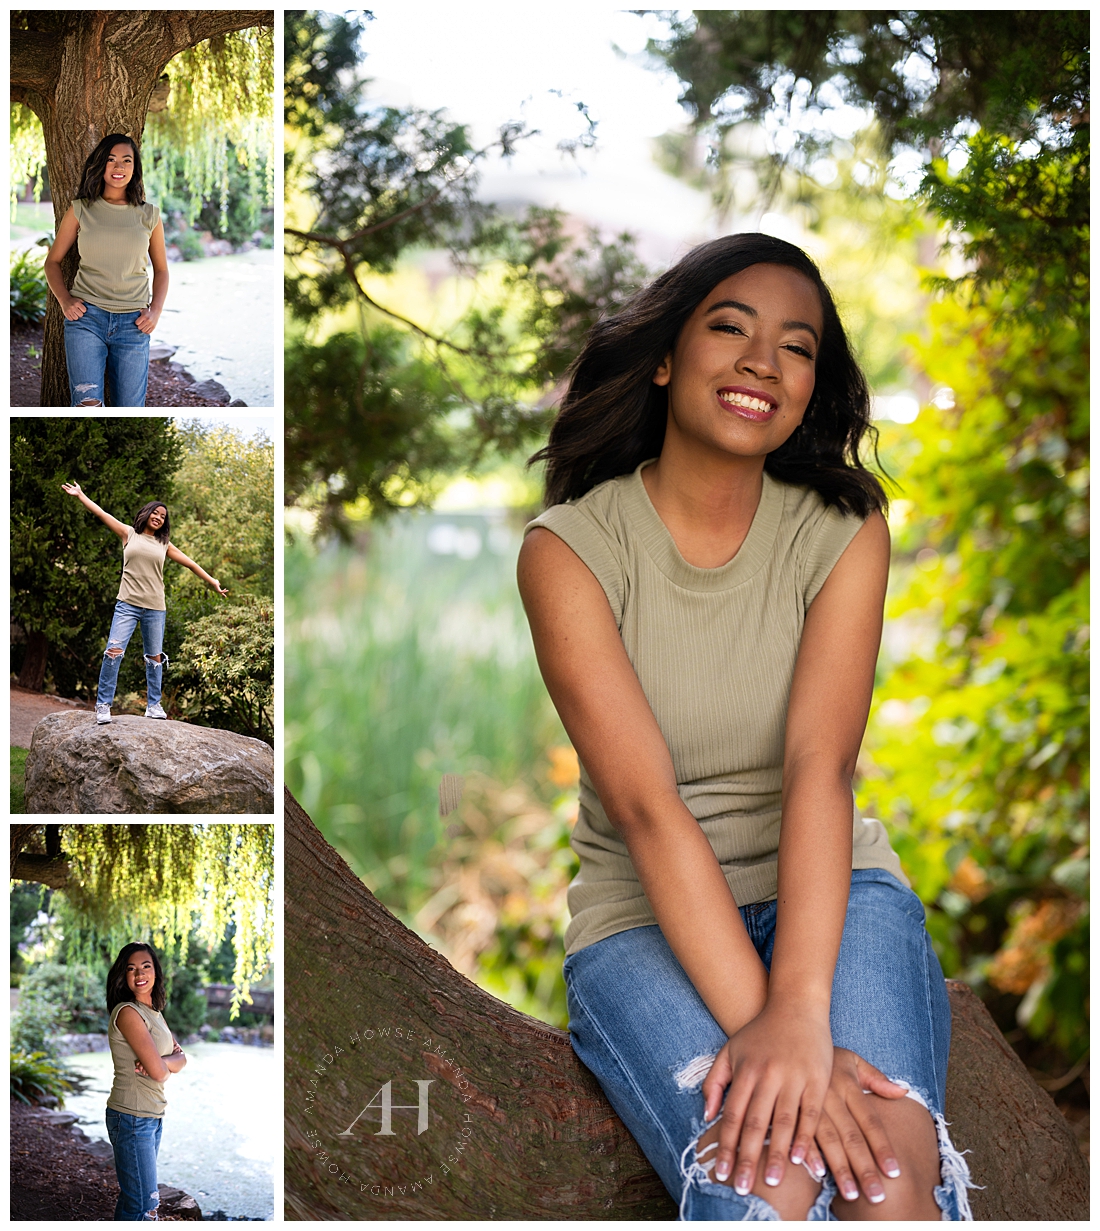 Fun Outdoor Senior Portraits with Large Tree and Pond | Amanda Howse Photography 